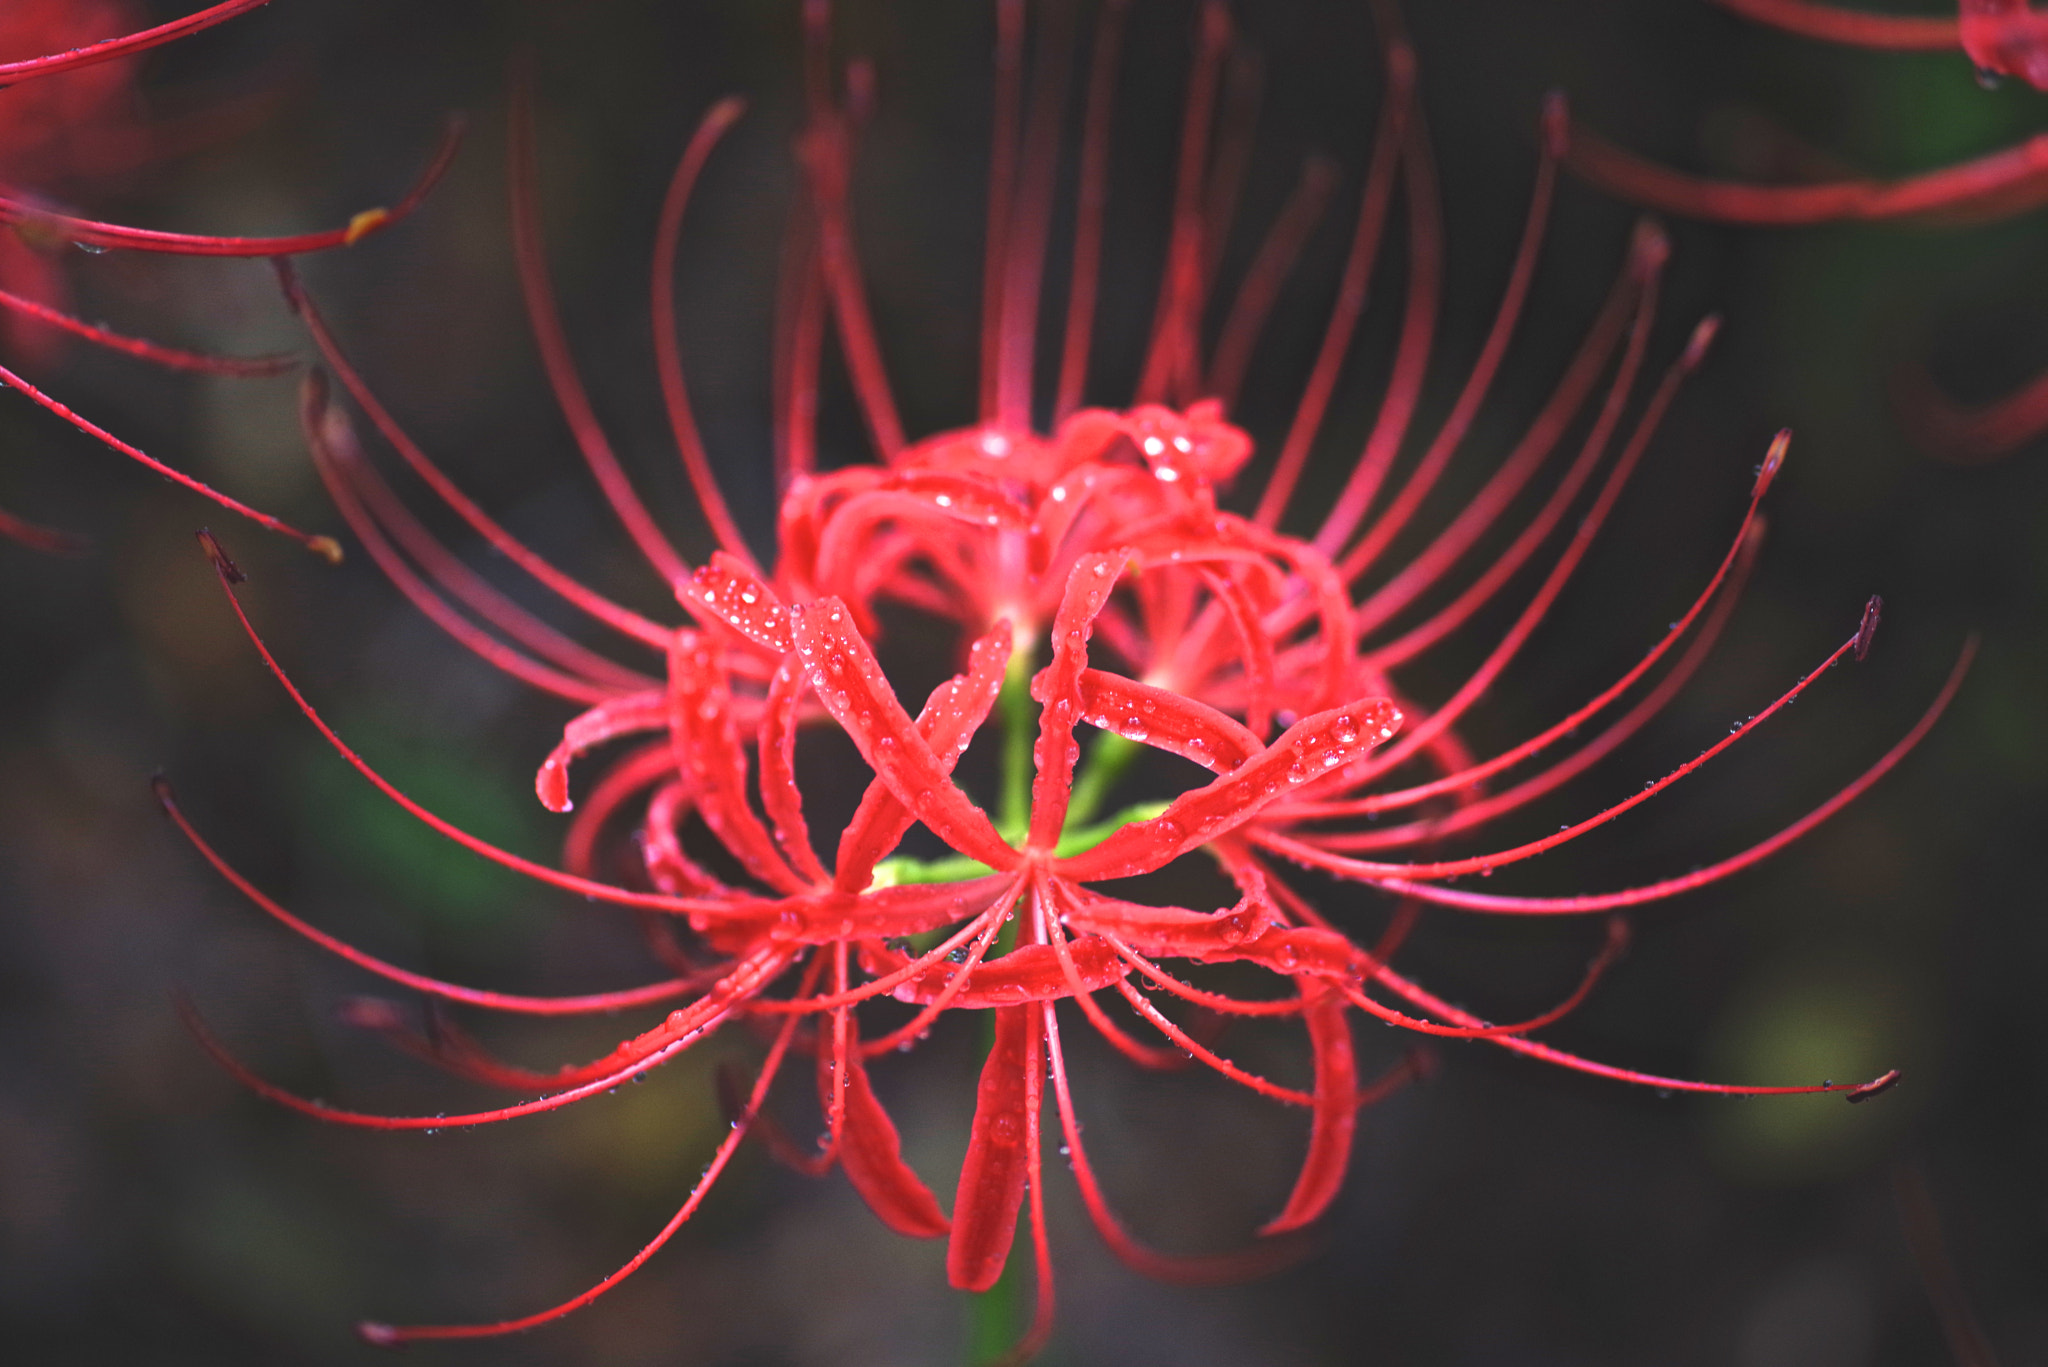 Pentax K-1 + Sigma sample photo. Red spider lily photography